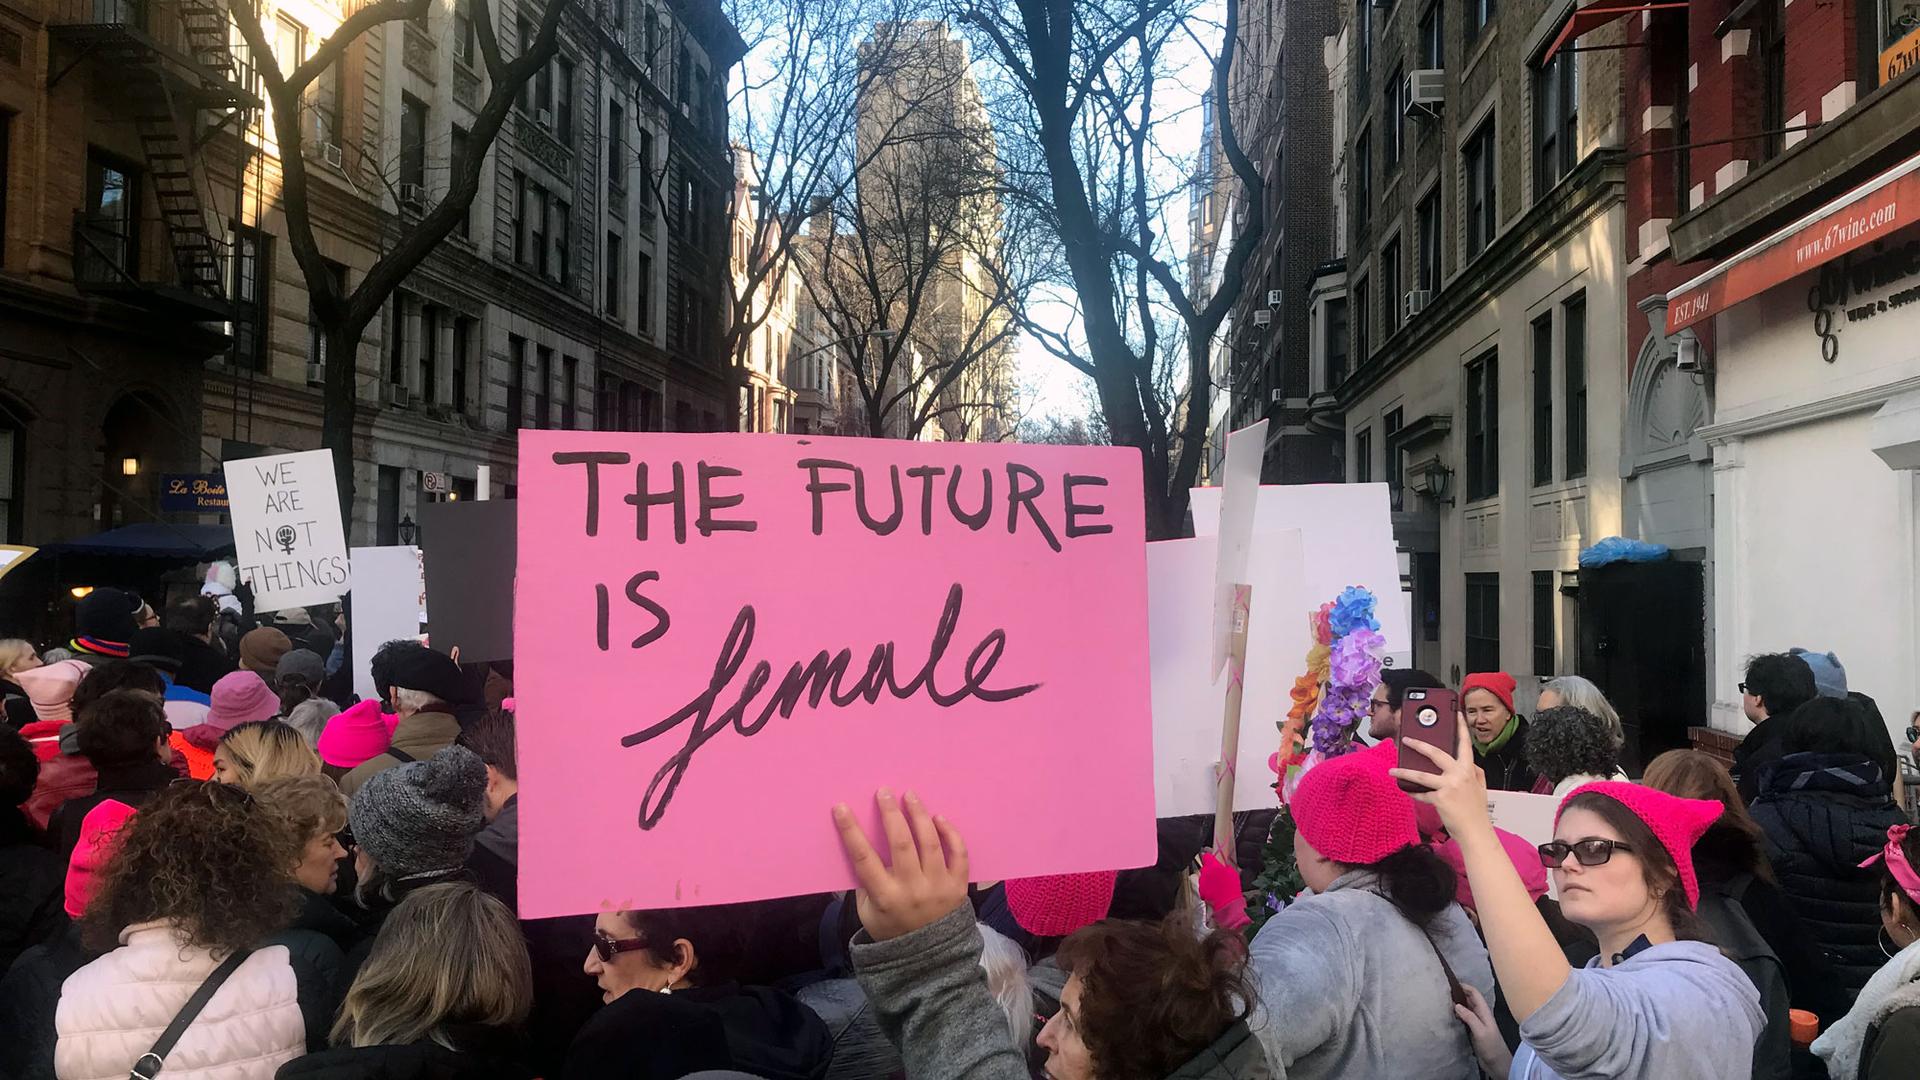 A pink sign reading, "The future is female" is hoisted above the crowds of marchers, some of whom are wearing the signature pink pussy hats.